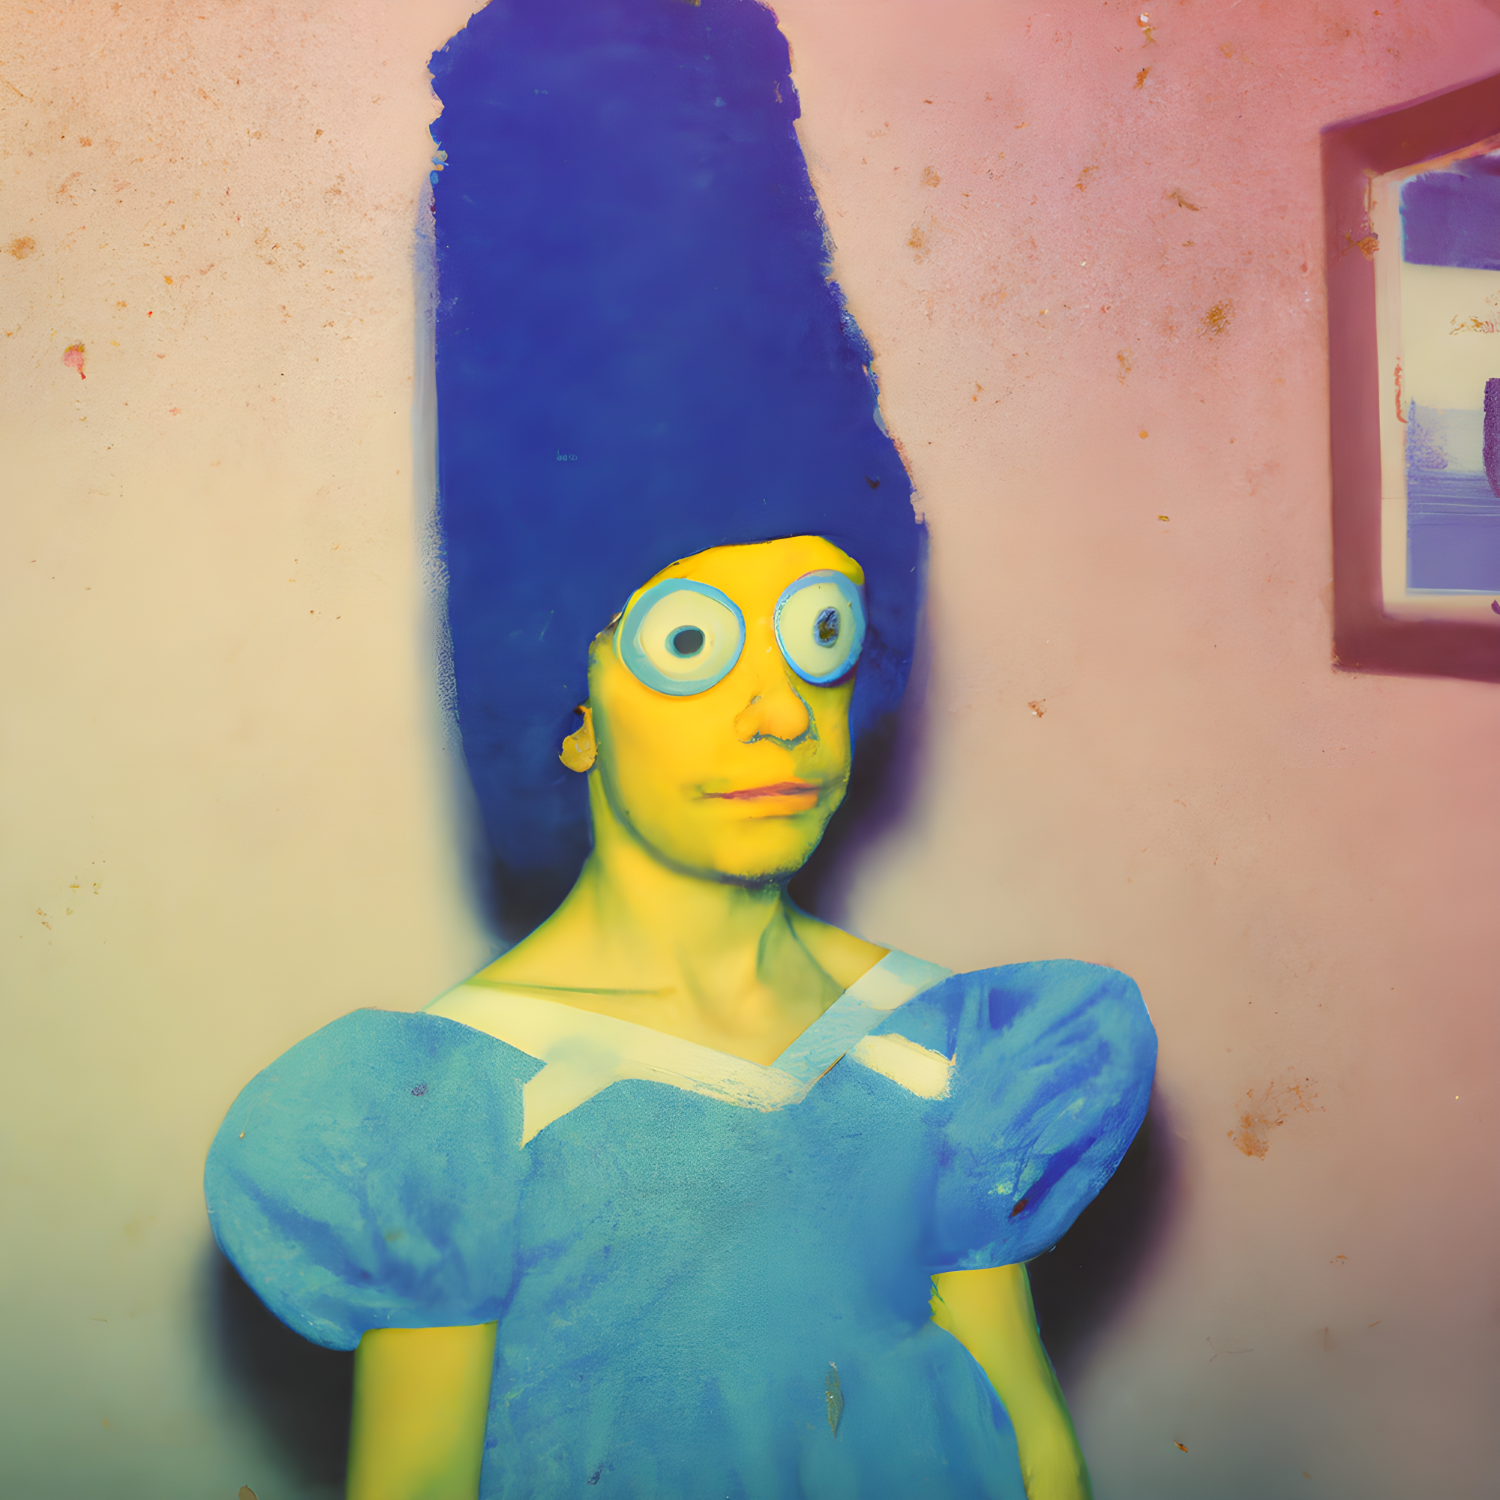 DALL-E generated image of Marge Simpson